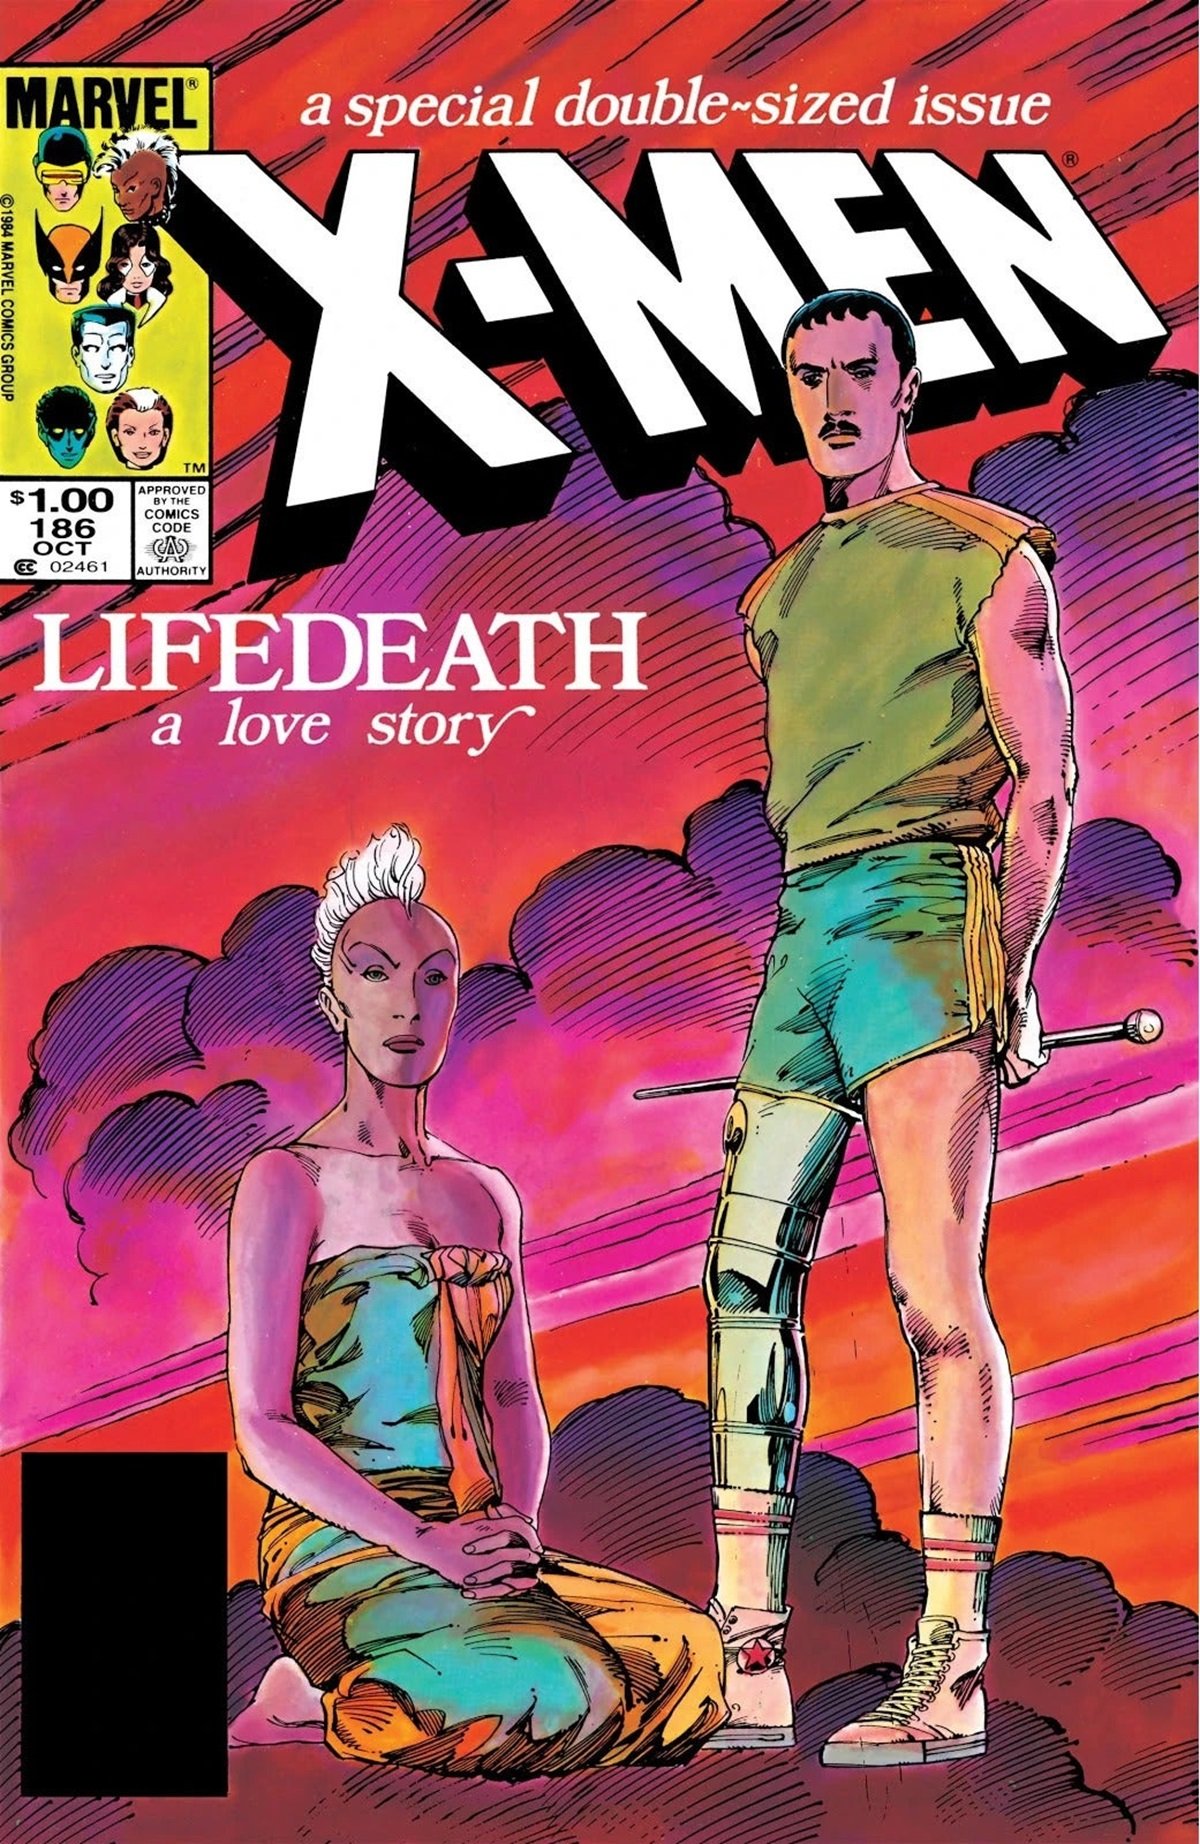 The Barry Windsor-Smith cover for Uncanny X-Men #186, Lifedeath.